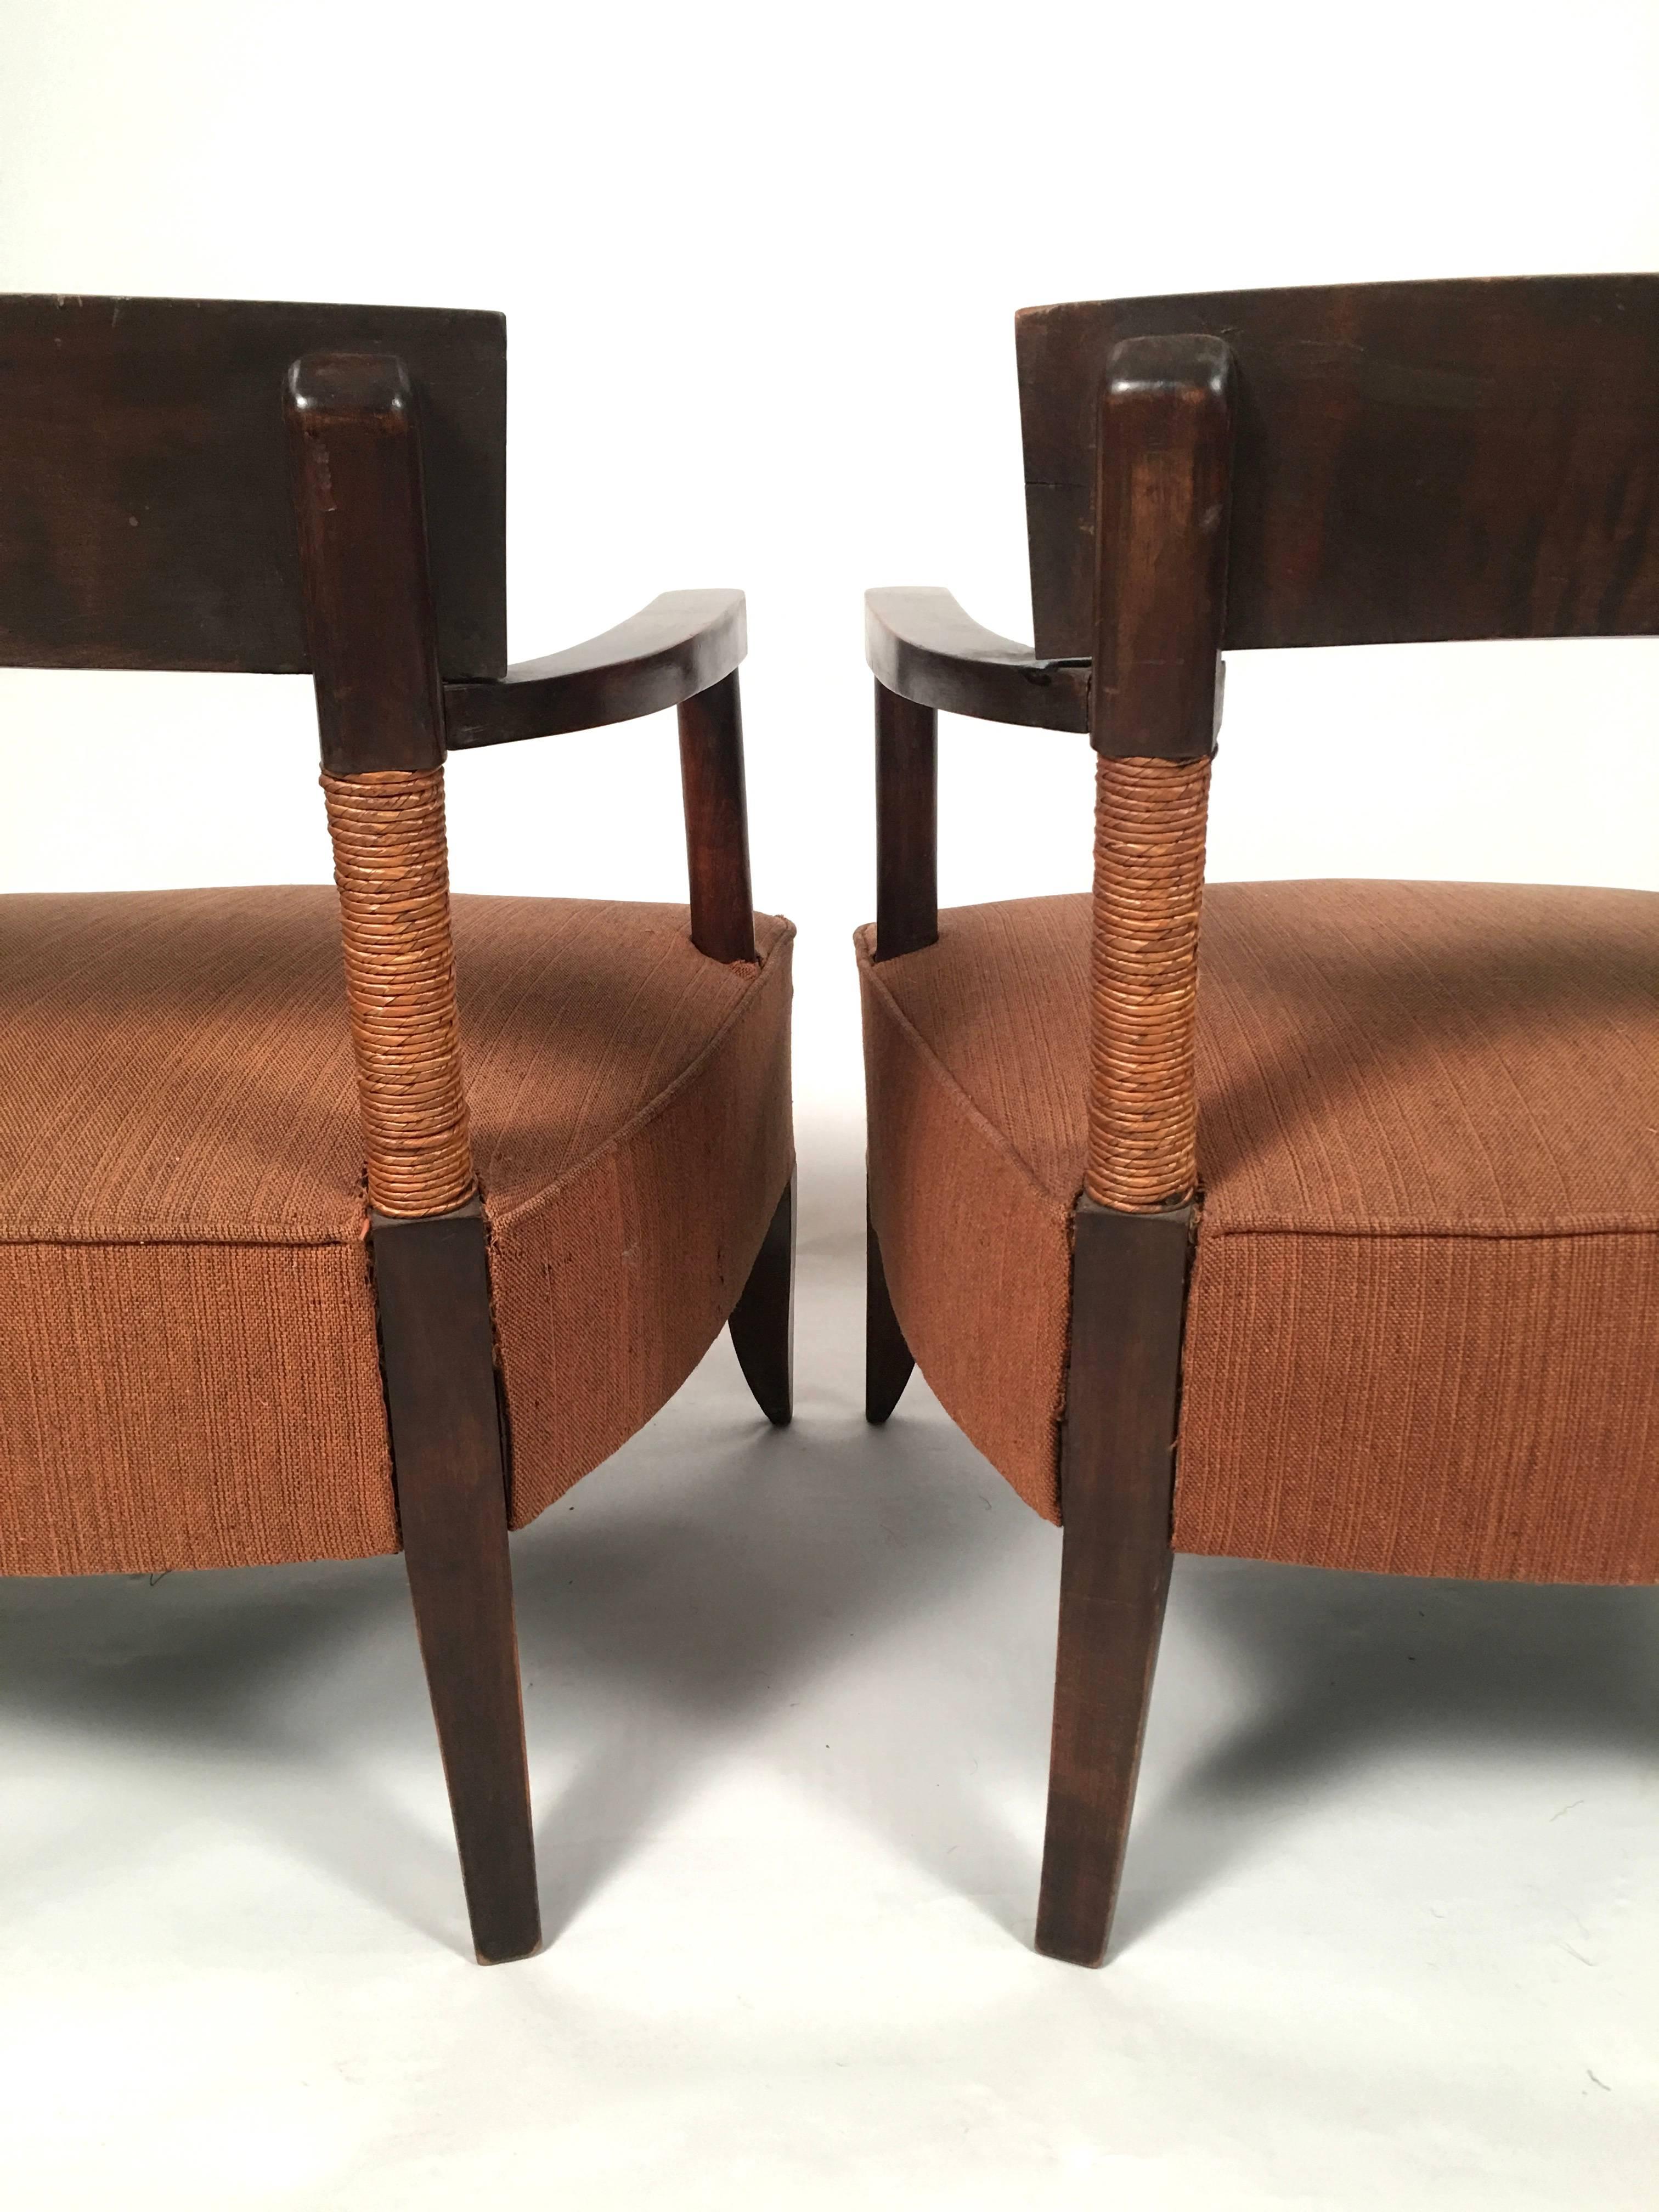 Upholstery Pair of French Art Deco African Inspired Oak and Paper Cord Armchairs